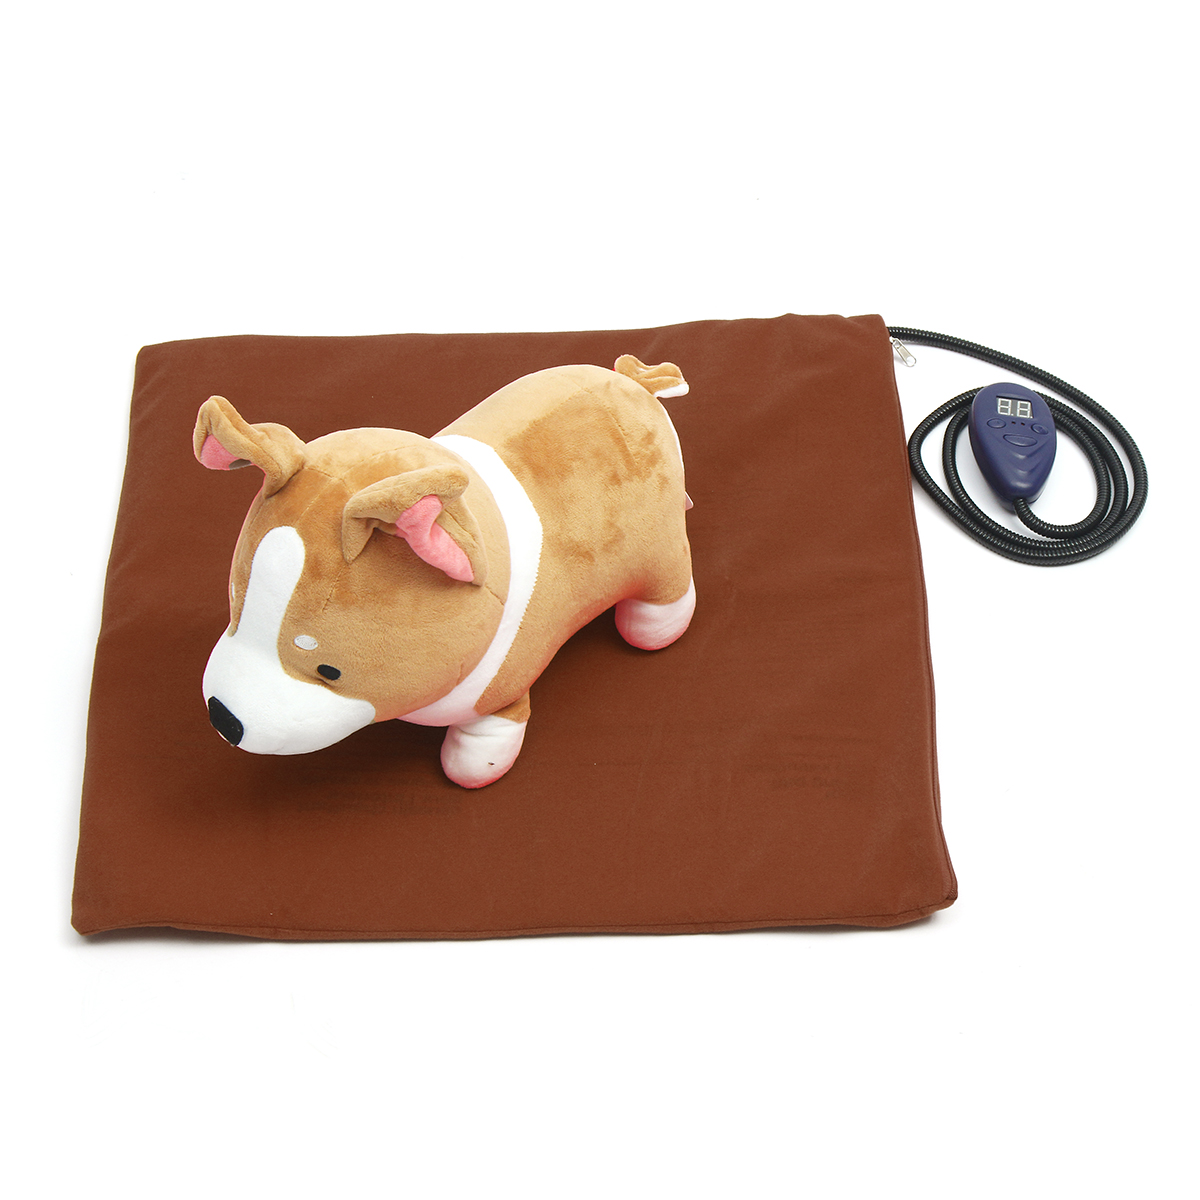 50x50cm-Electric-Heating-Heater-Heated-Bed-Mat-Pad-Blanket-Without-Cable-For-Pet-Dog-Cat-Rabbit-1317919-1